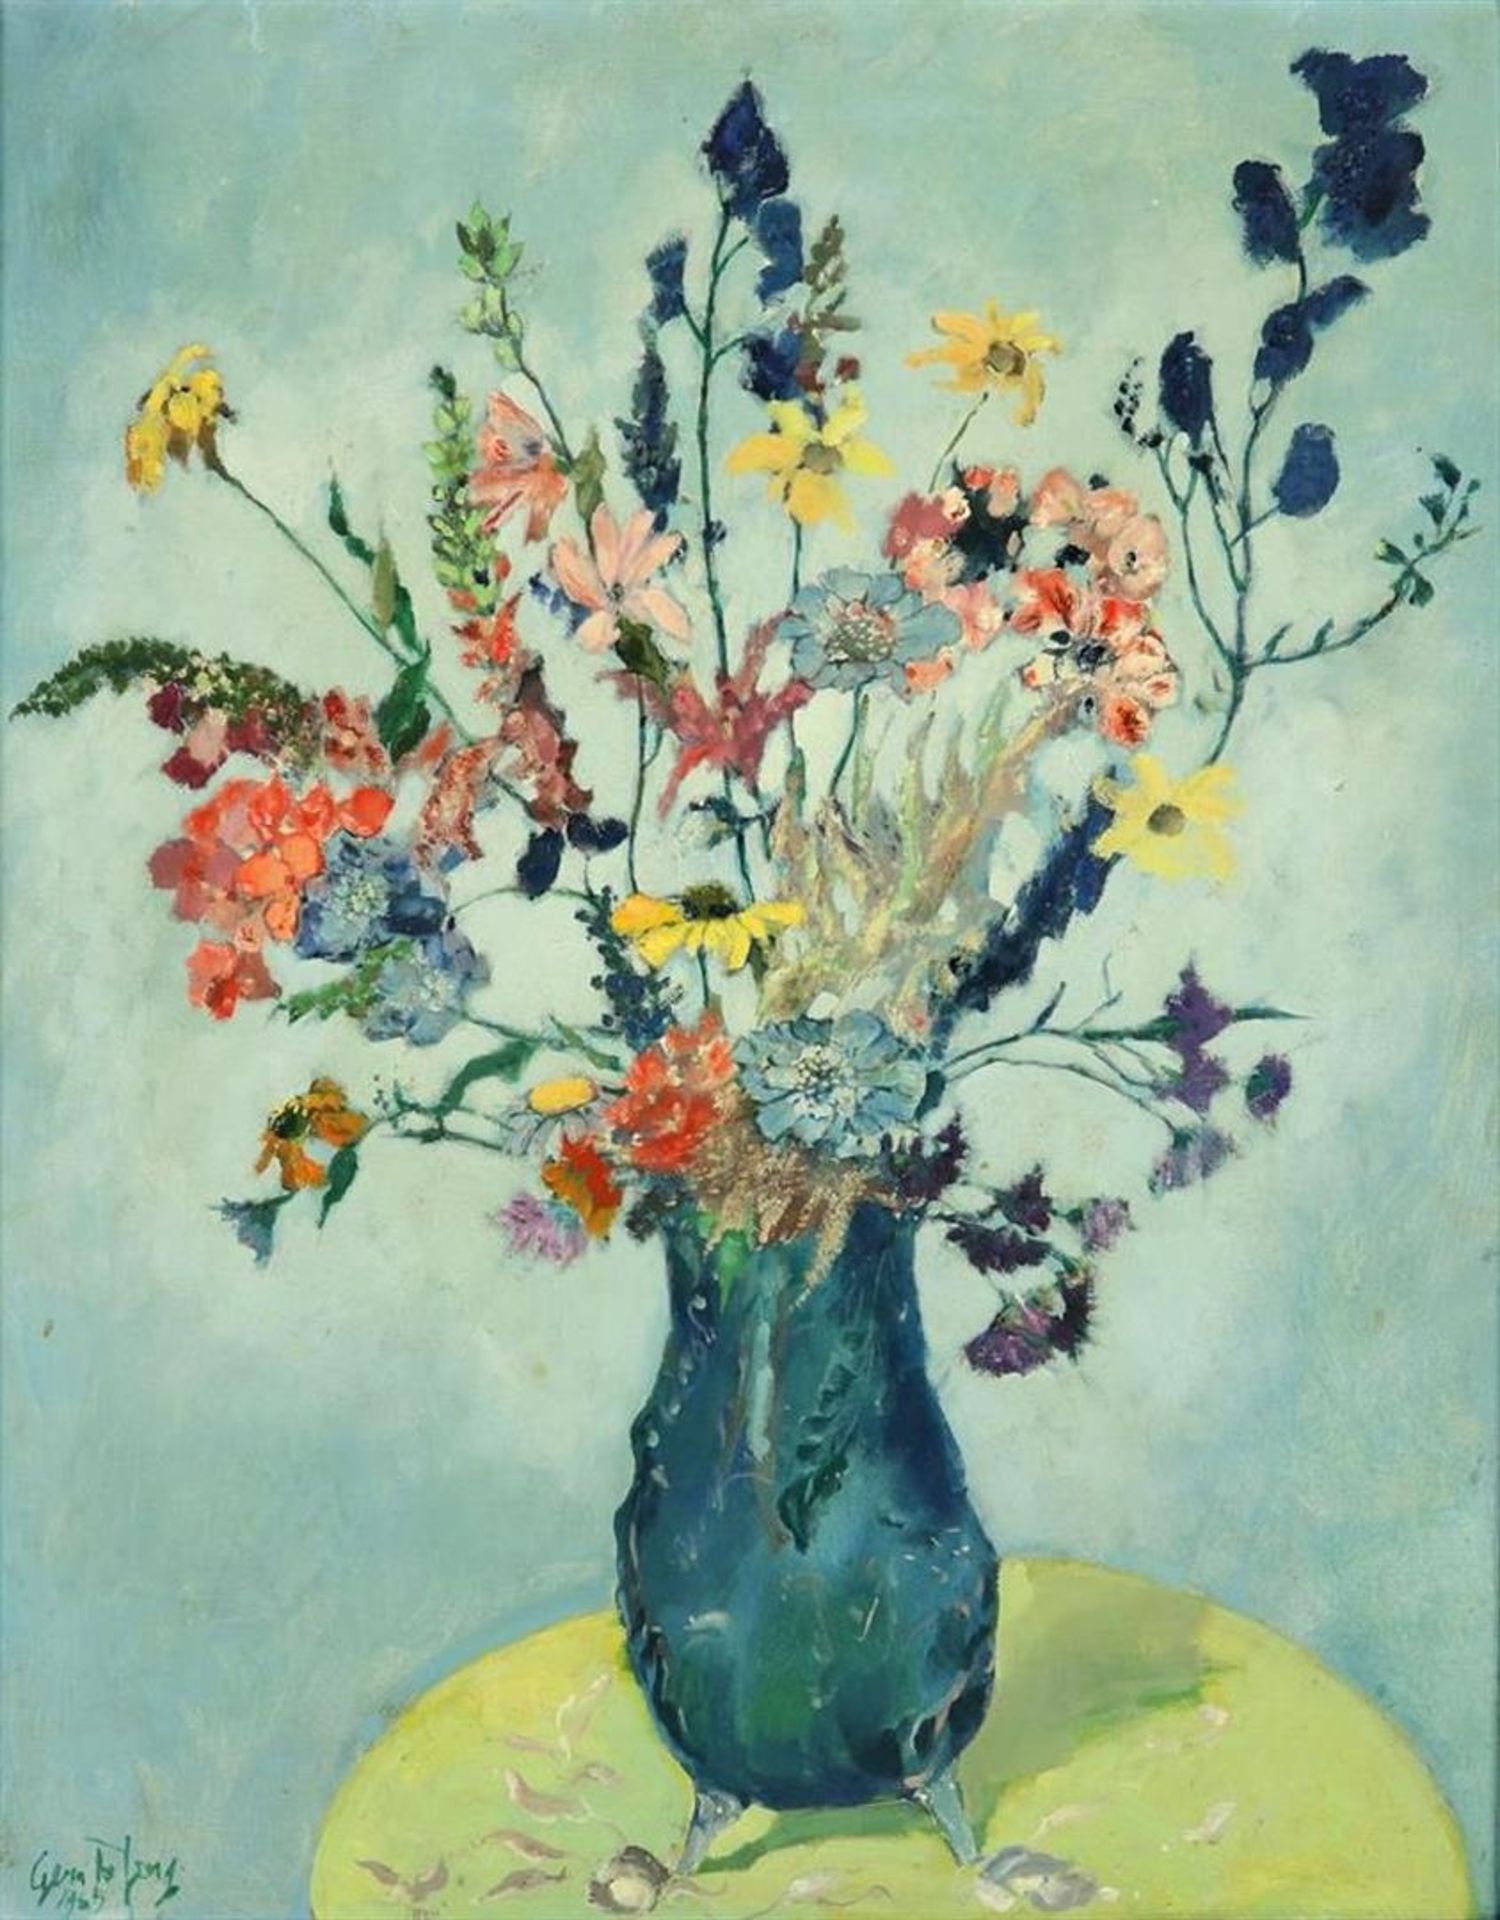 Germ de Jong (1886-1967) Flower still life, titled verso: "the decorated vase" signed and dated 1965